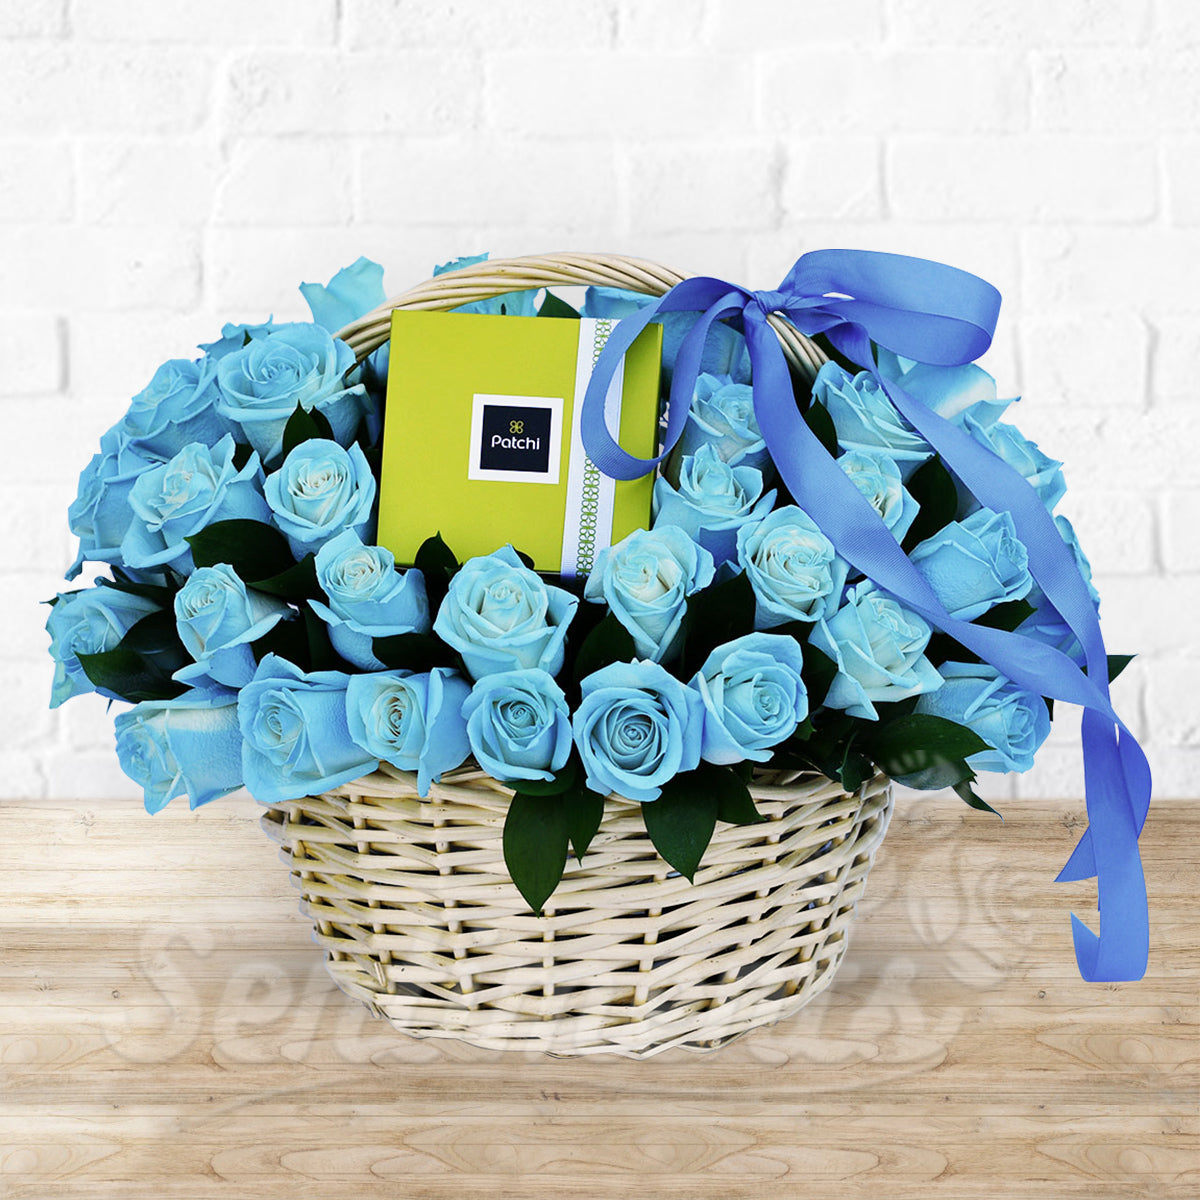 Bluer than Blue Romantic Roses Flower Arrangement with Patchi Chocolate